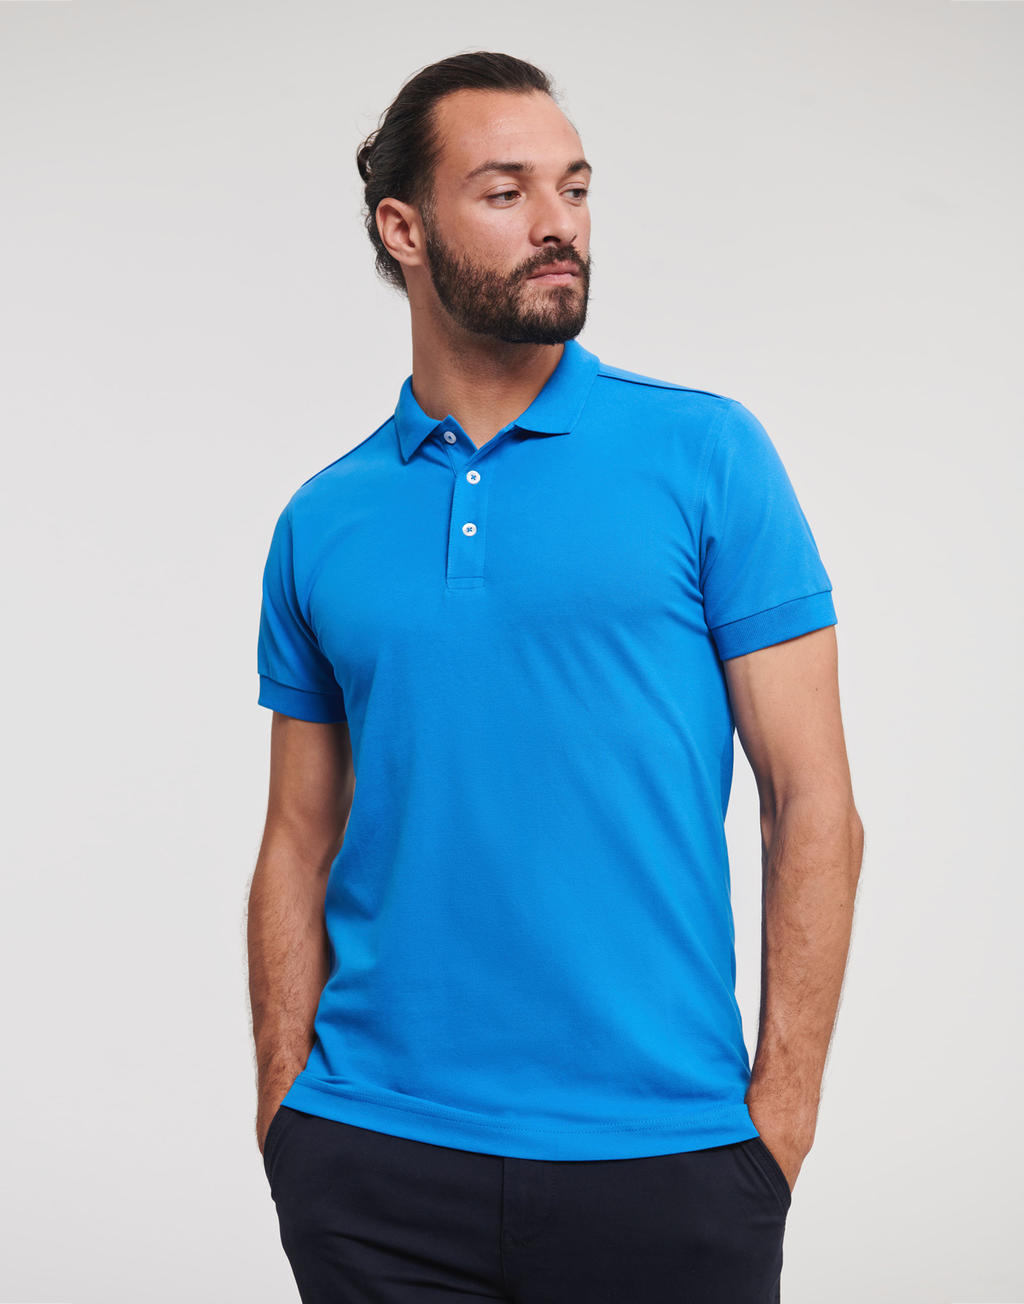 Mens Fitted Stretch Polo